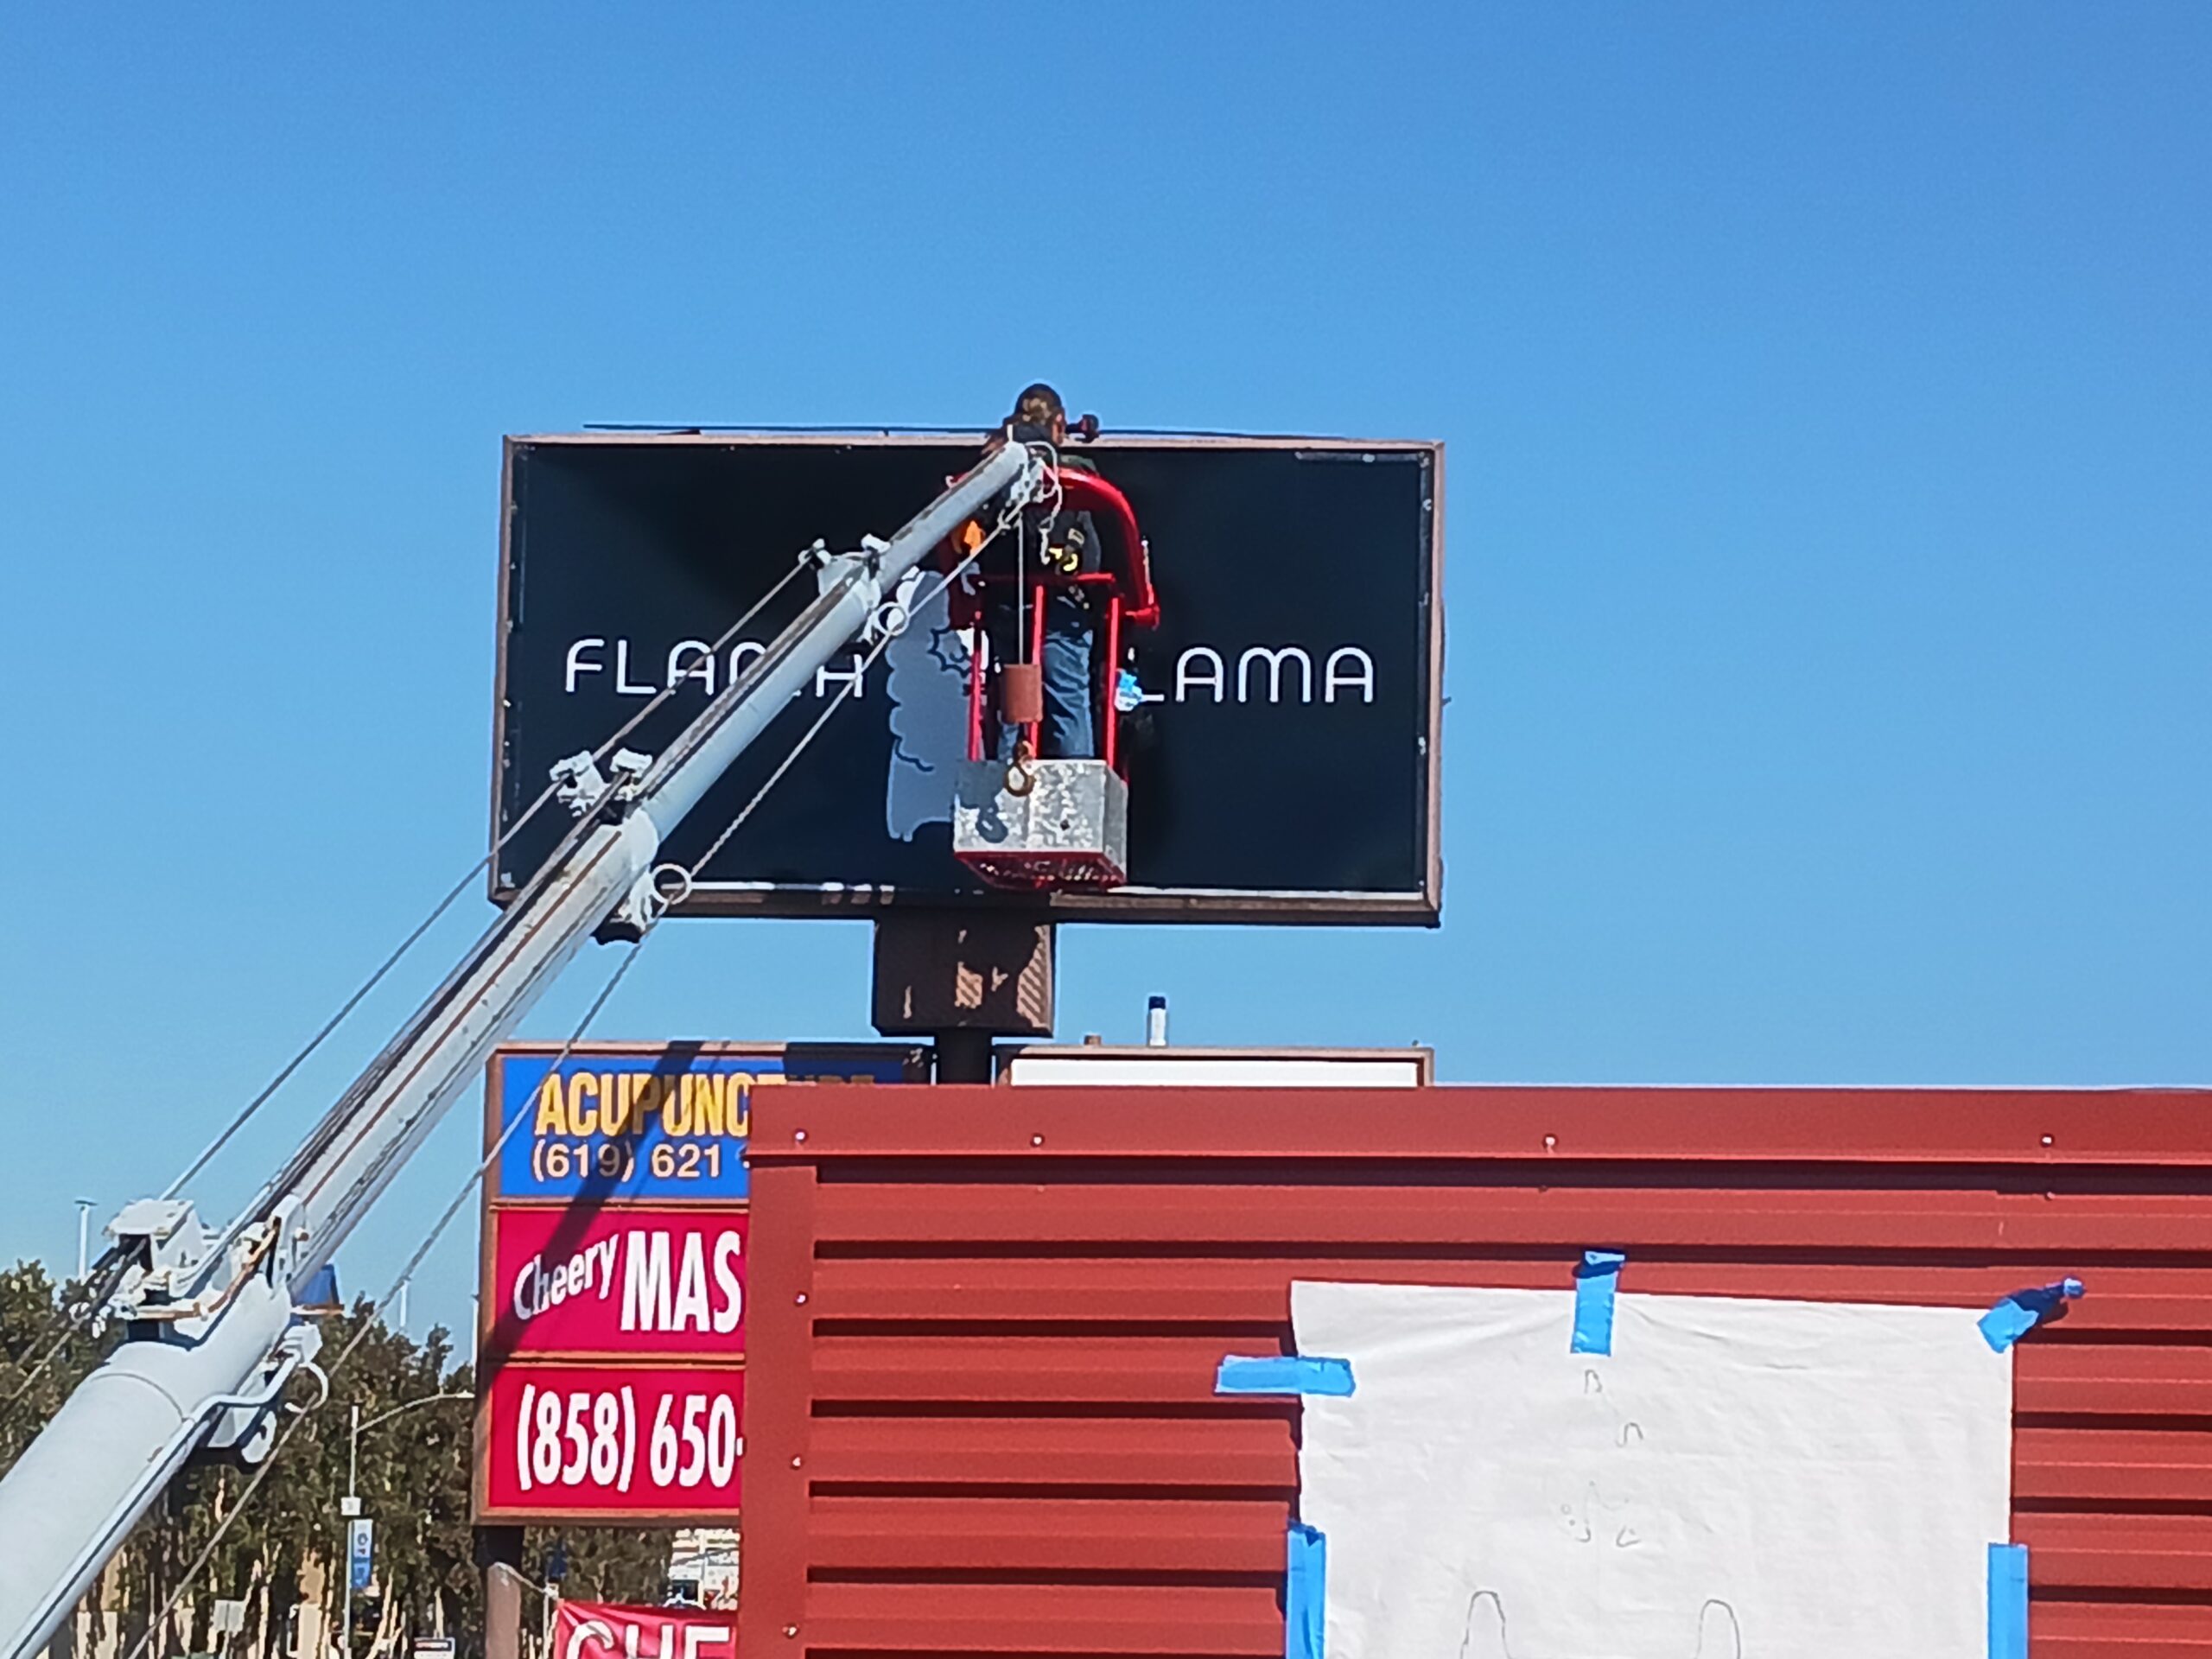 custom signs, retrofit fluorescent to led signs for Flama Lama